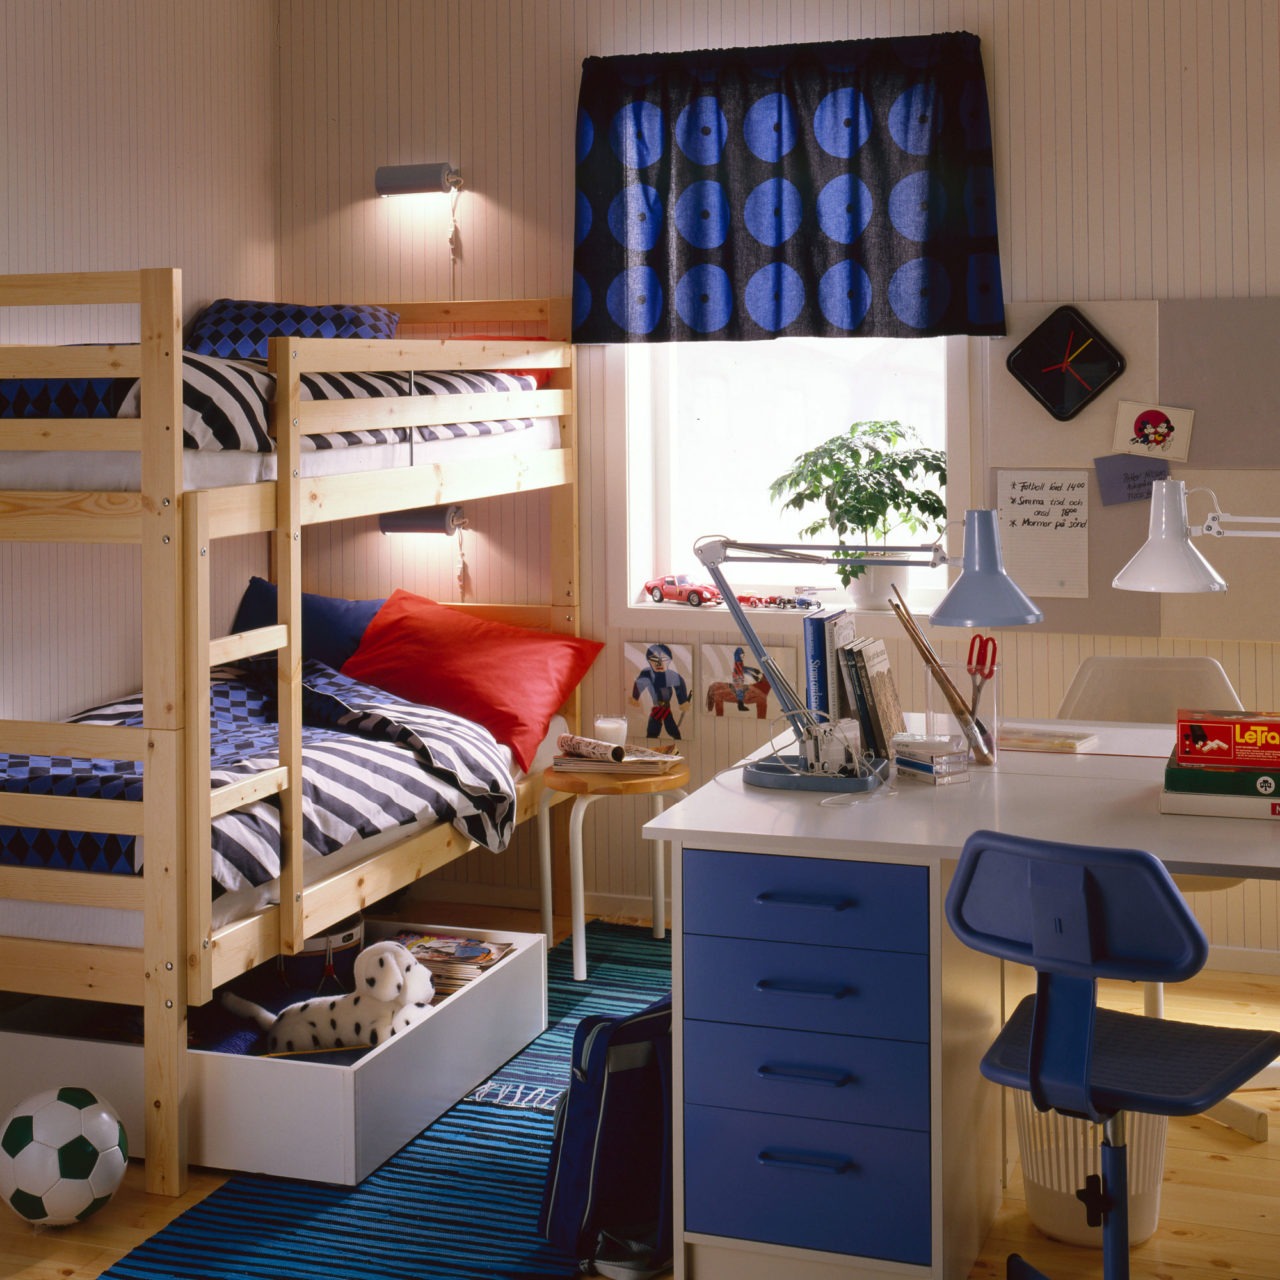 A light children’s room with a REKDAL bunk bed and light wooden flooring. Scattered toys and a white BOJ desk.